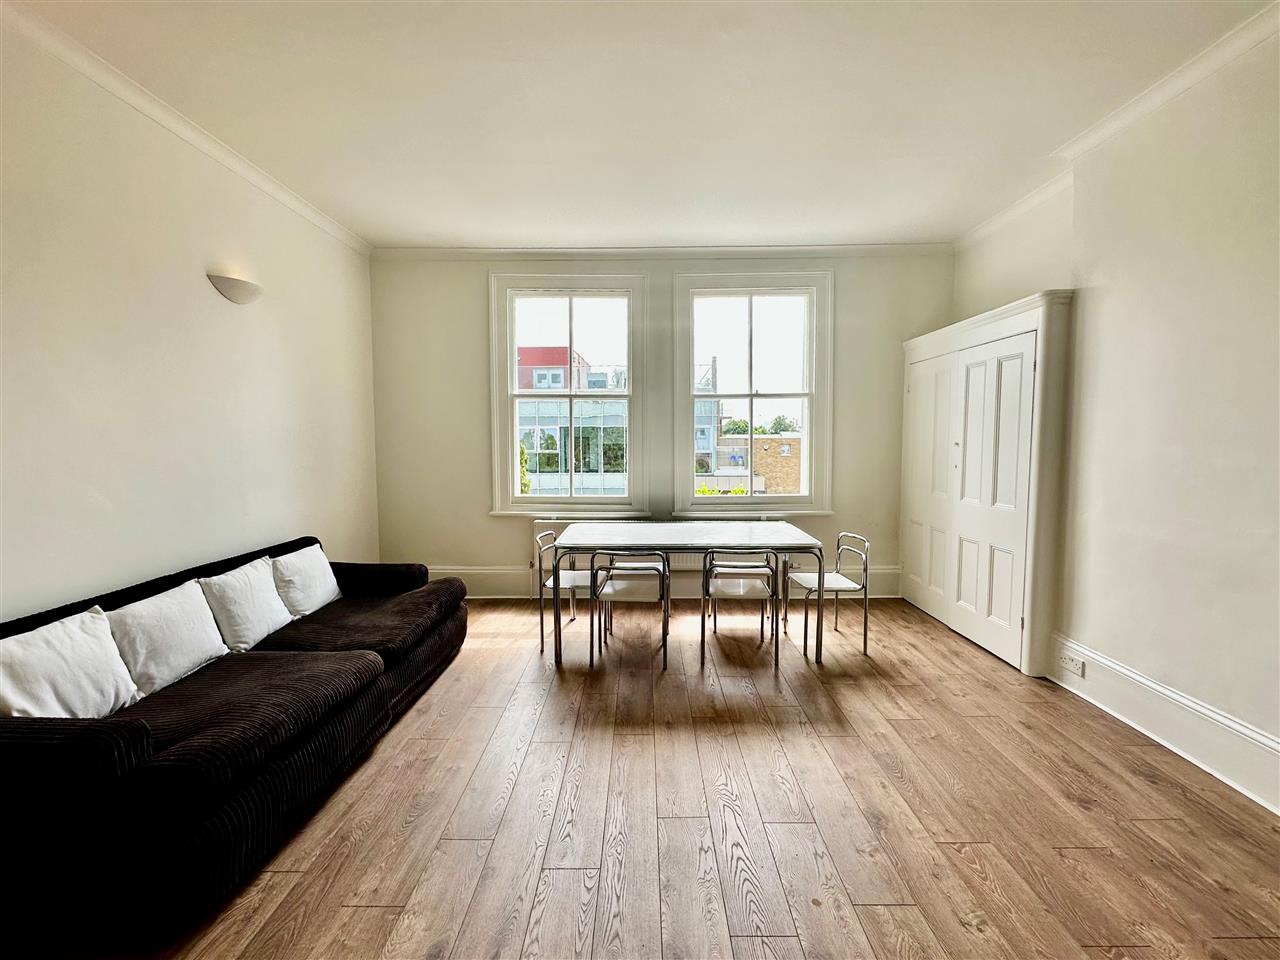 2 bed flat to rent in Hornsey Lane - Property Image 1